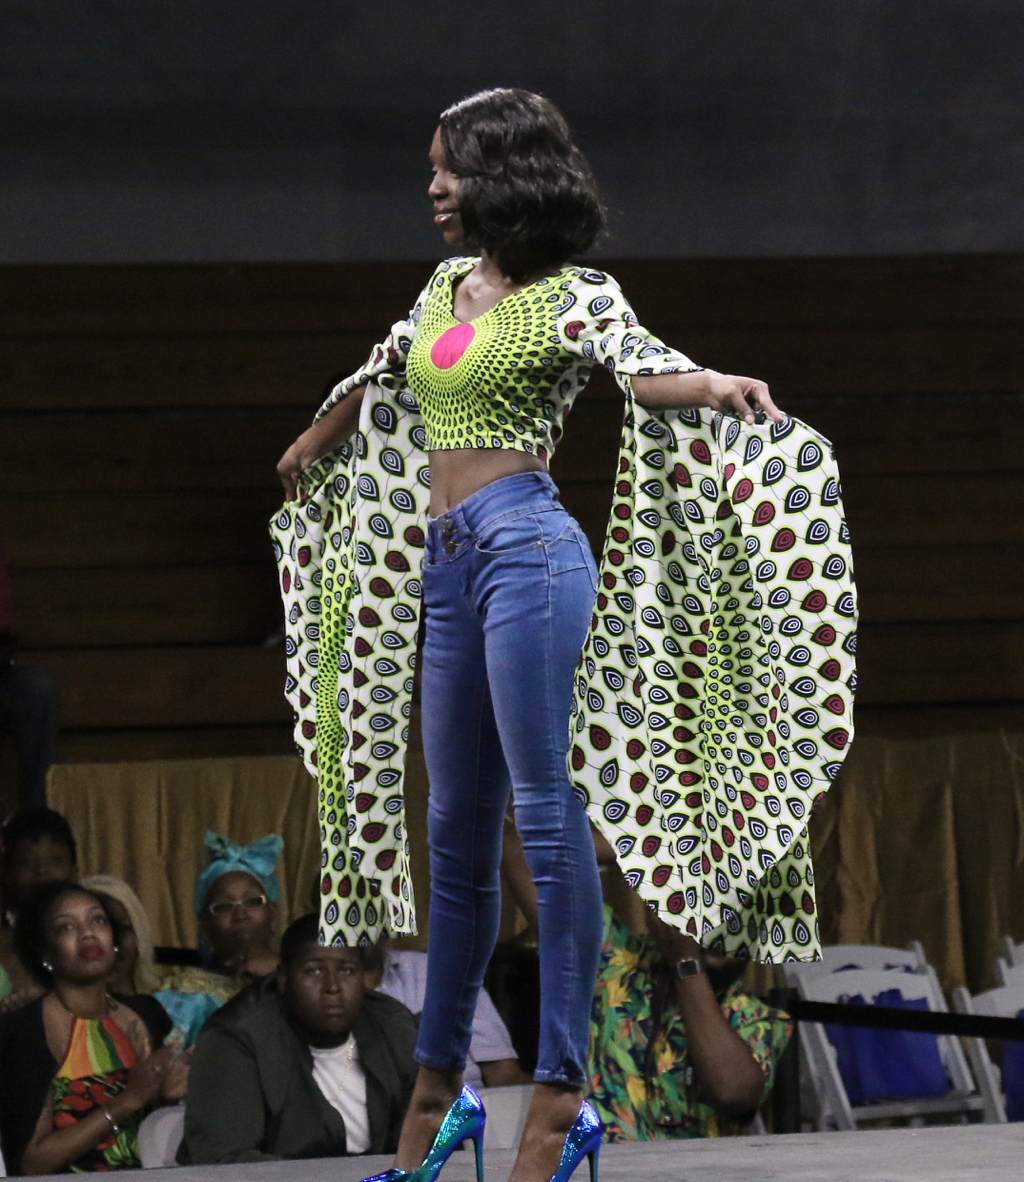 Ariyan Vitoria of St. Croix displays lots of color during the jeans segment of the Commercial Division. (Linda Morland photo)